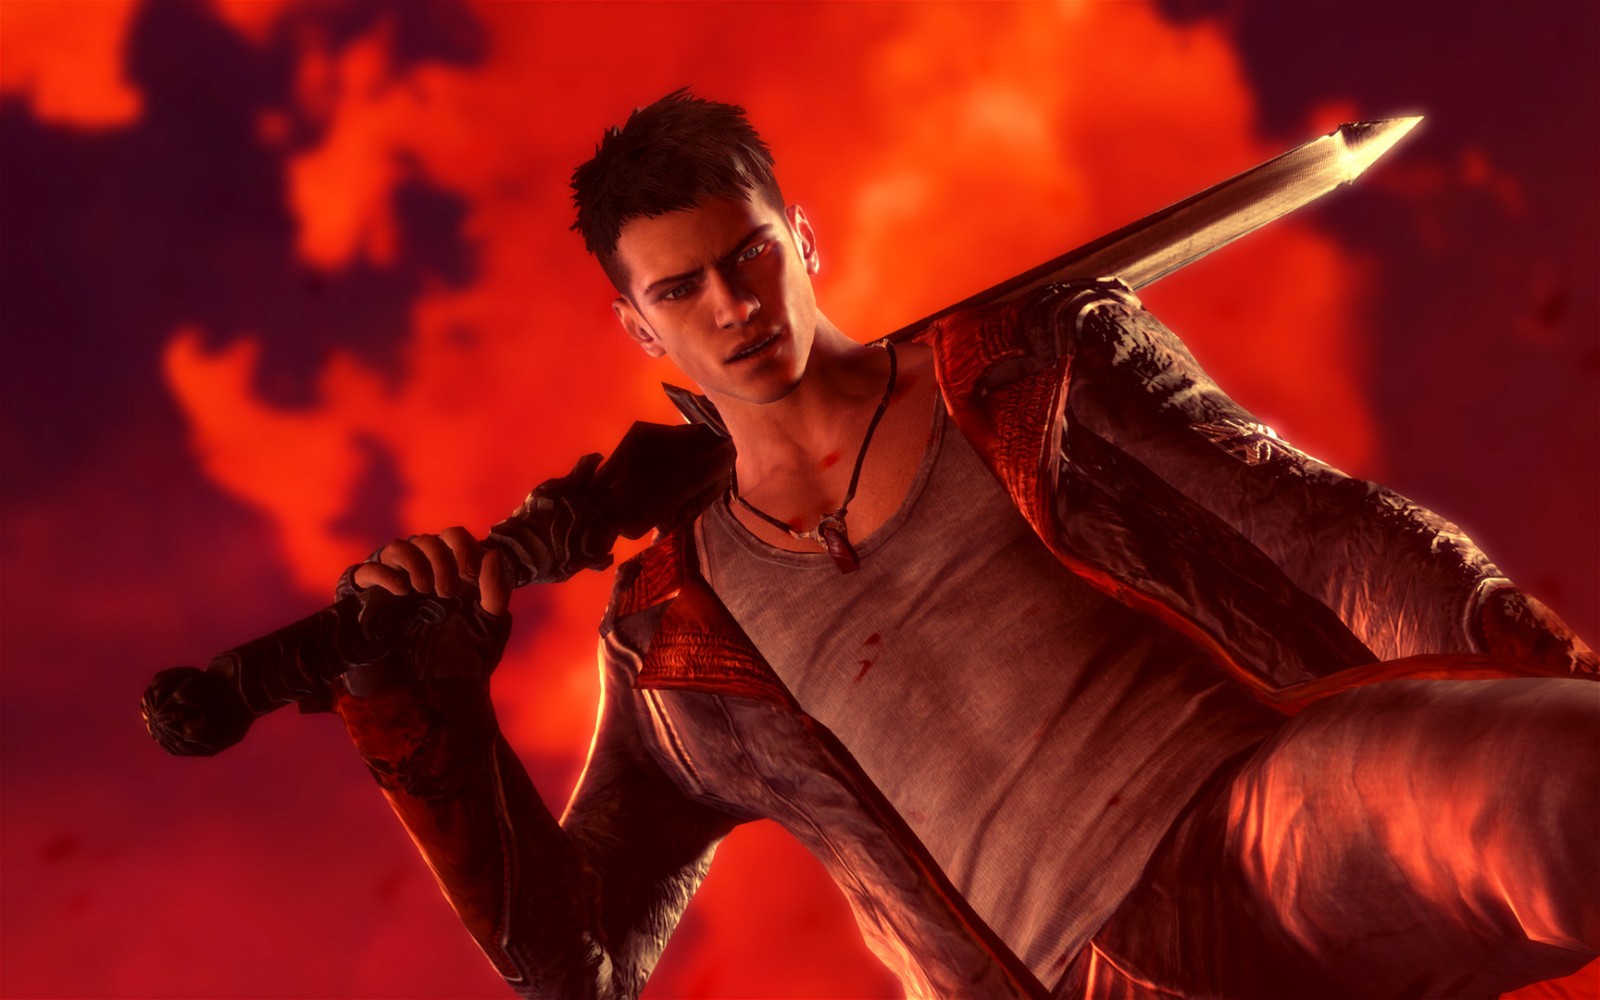 Devil May Cry on Steam